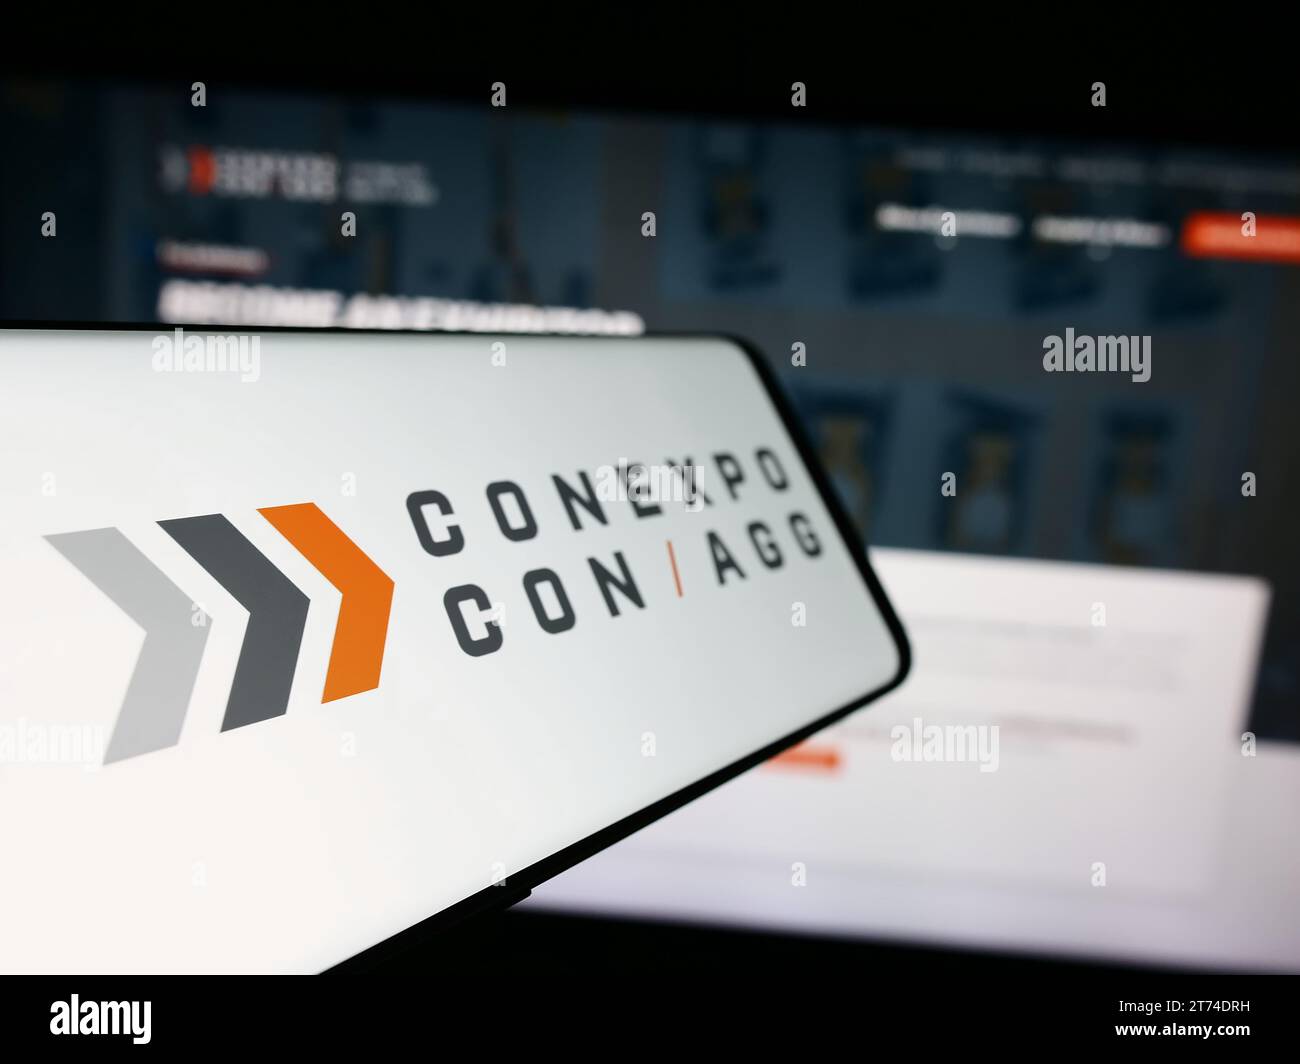 Smartphone with logo of American construction trade show CONEXPO-CON-AGG in front of business website. Focus on center-left of phone display. Stock Photo